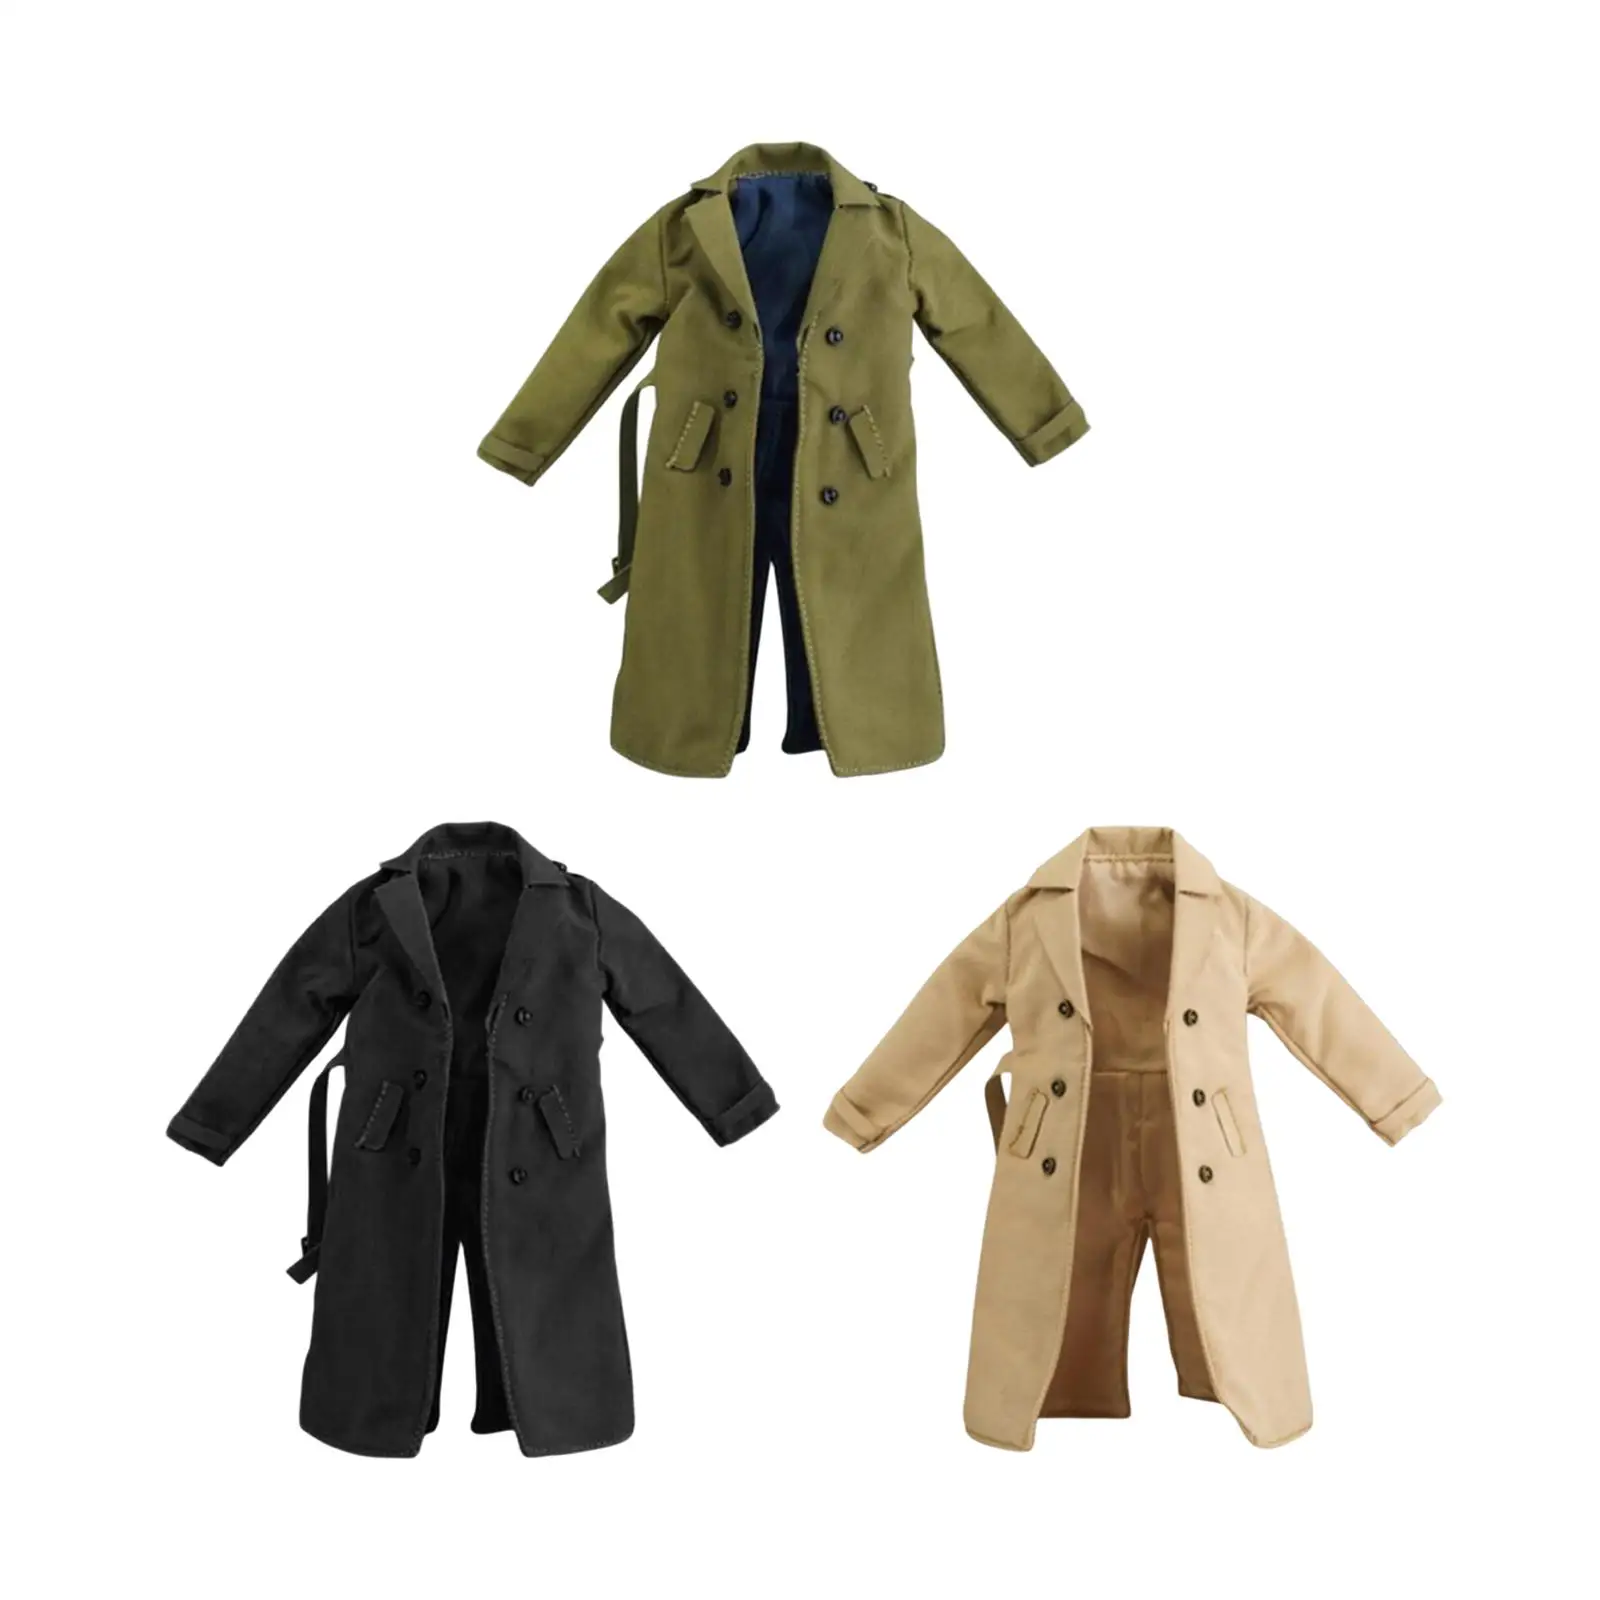 

1/12 Scale Trench Coat Costume Handmade Doll Clothes for 6" Doll Model Male Female Action Figures Dress up Accs